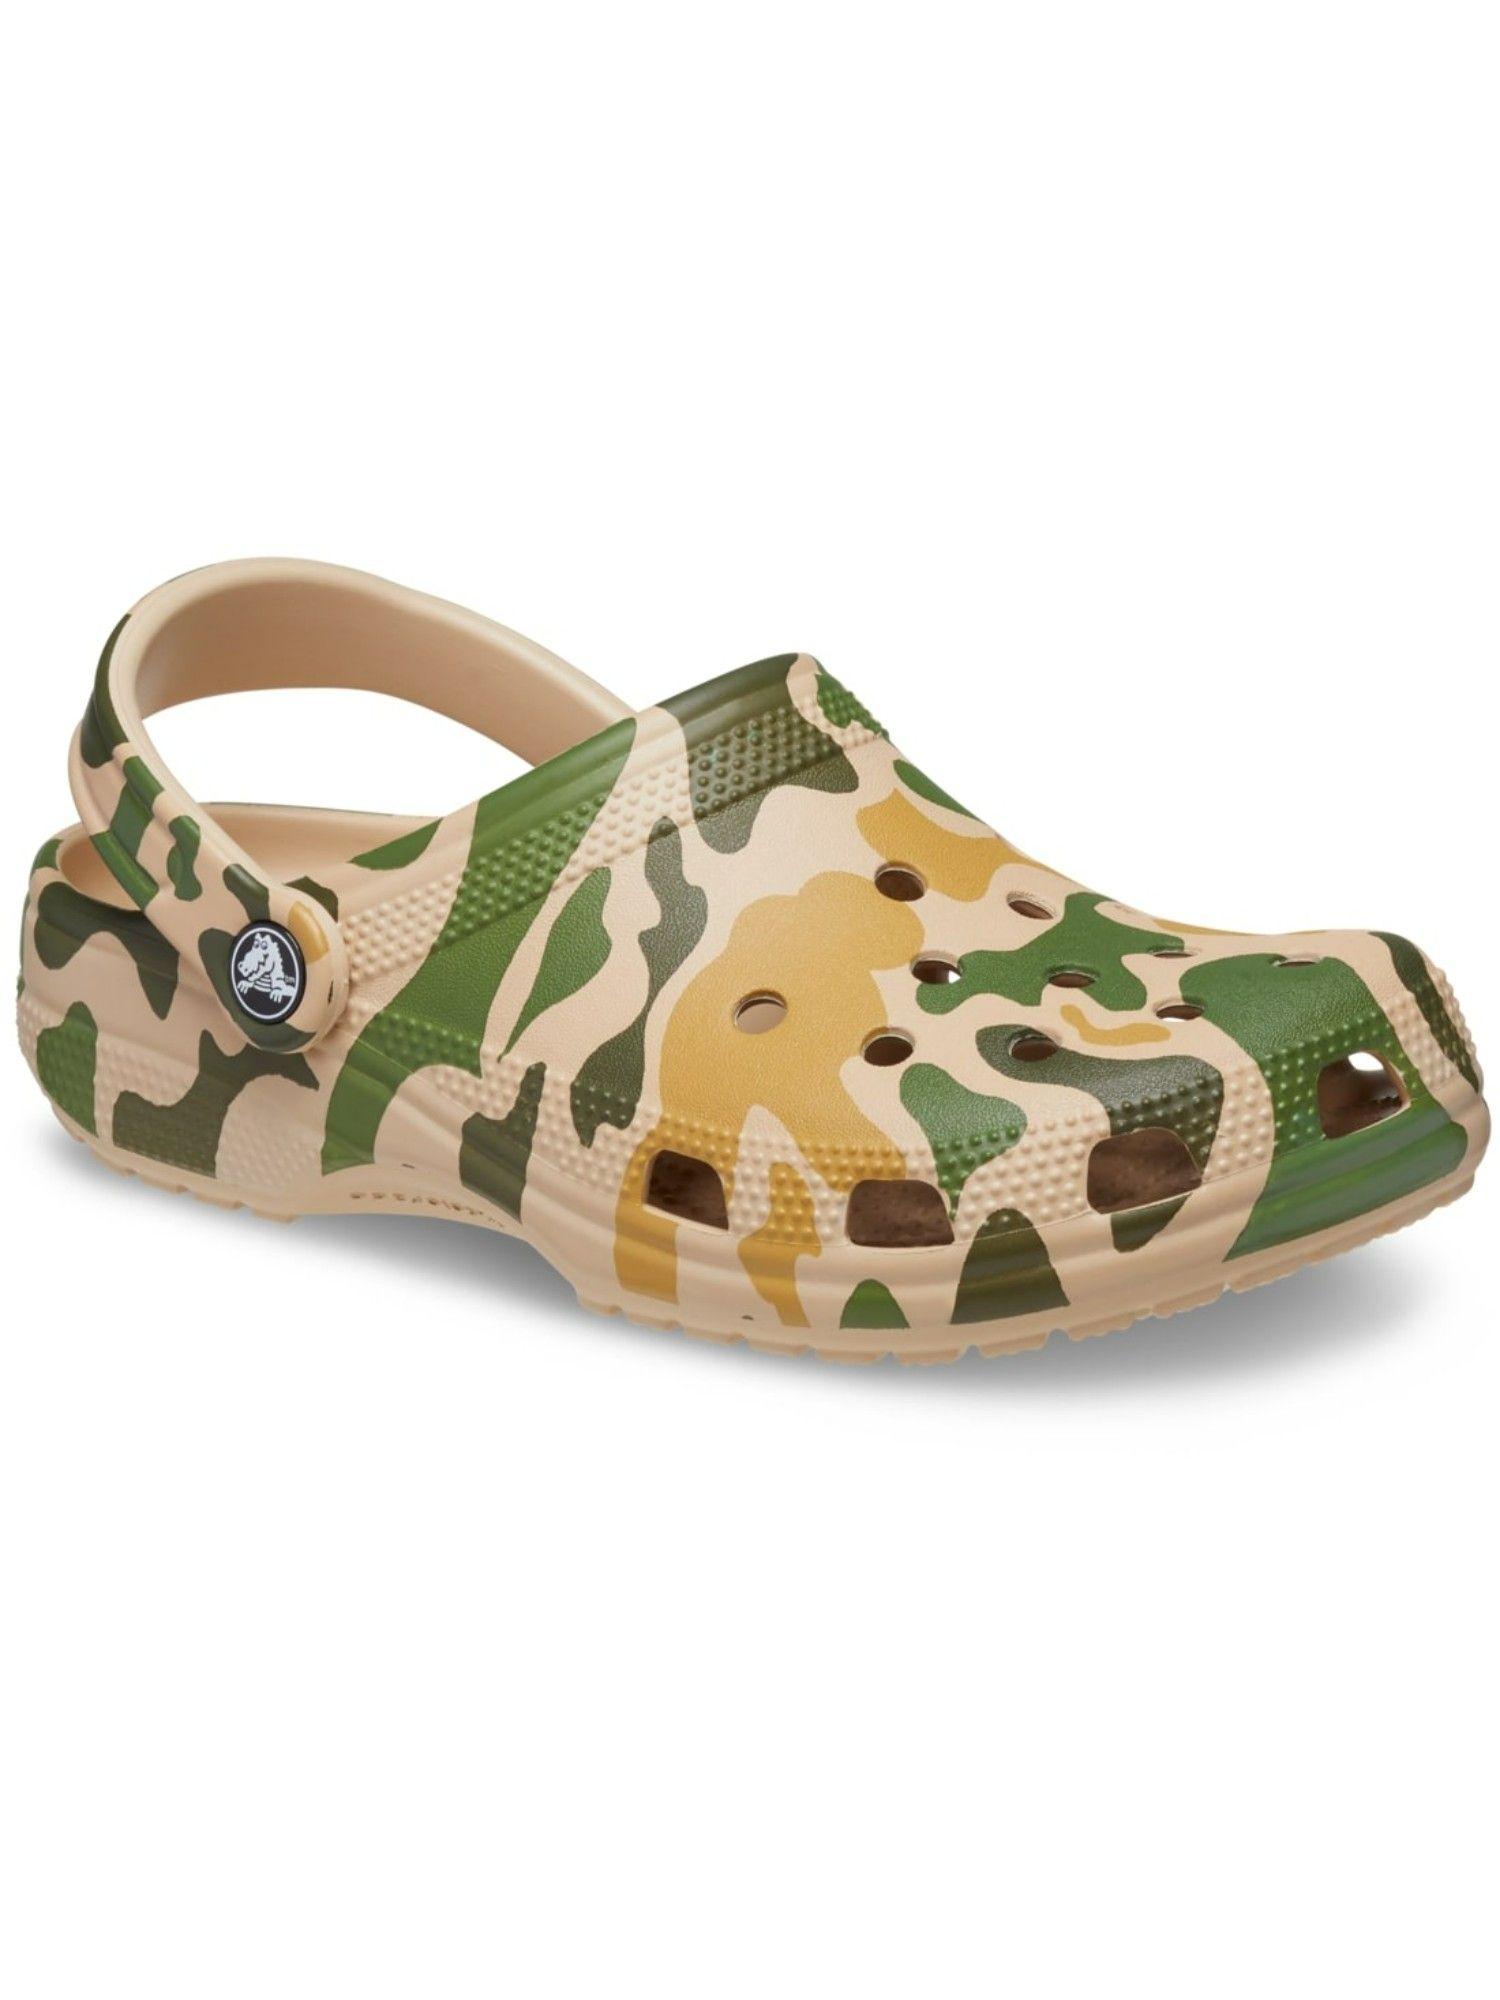 classic multi color unisex adults camouflage clog